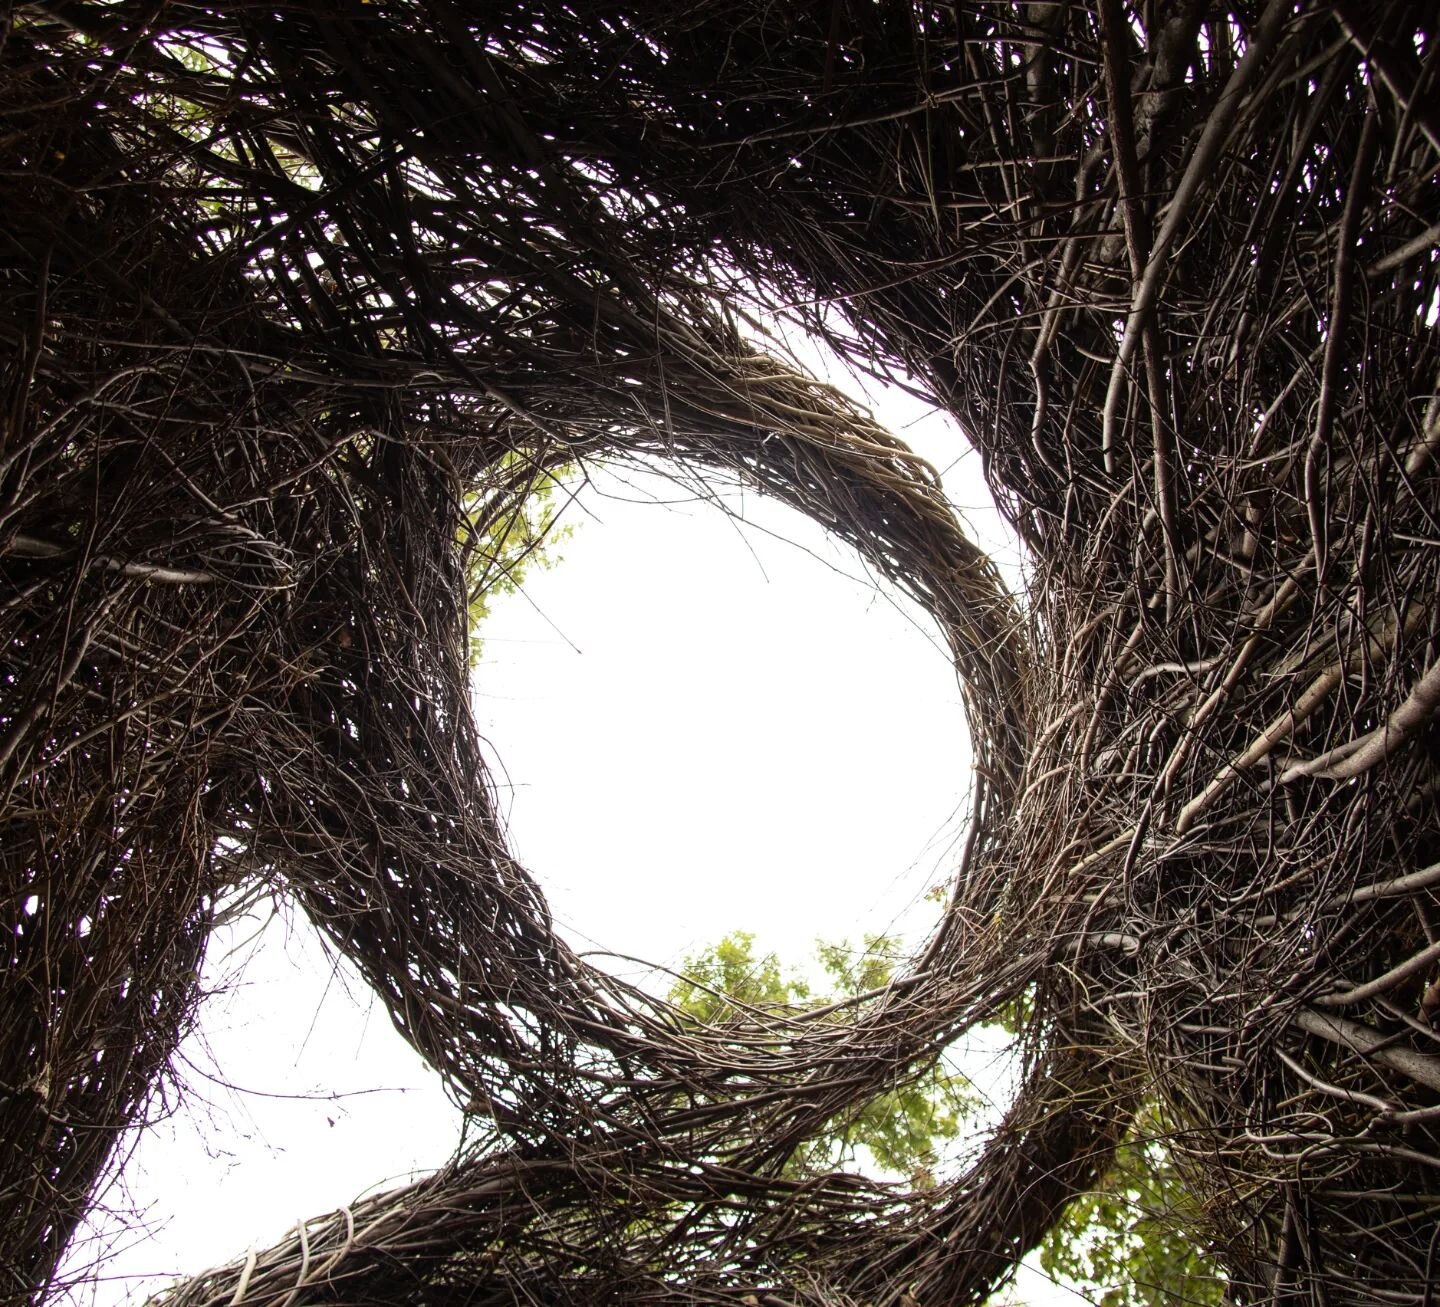 Join us for an afternoon of 'stickwork maintenance' on Patrick Dougherty's 'A Walk in the Park' stickwork sculpture at Eliza Howell Park on May 17, 2:00 - 5:00pm. All ages and abilities are welcome. 

Minors must be accompanied by a guardian. We are 